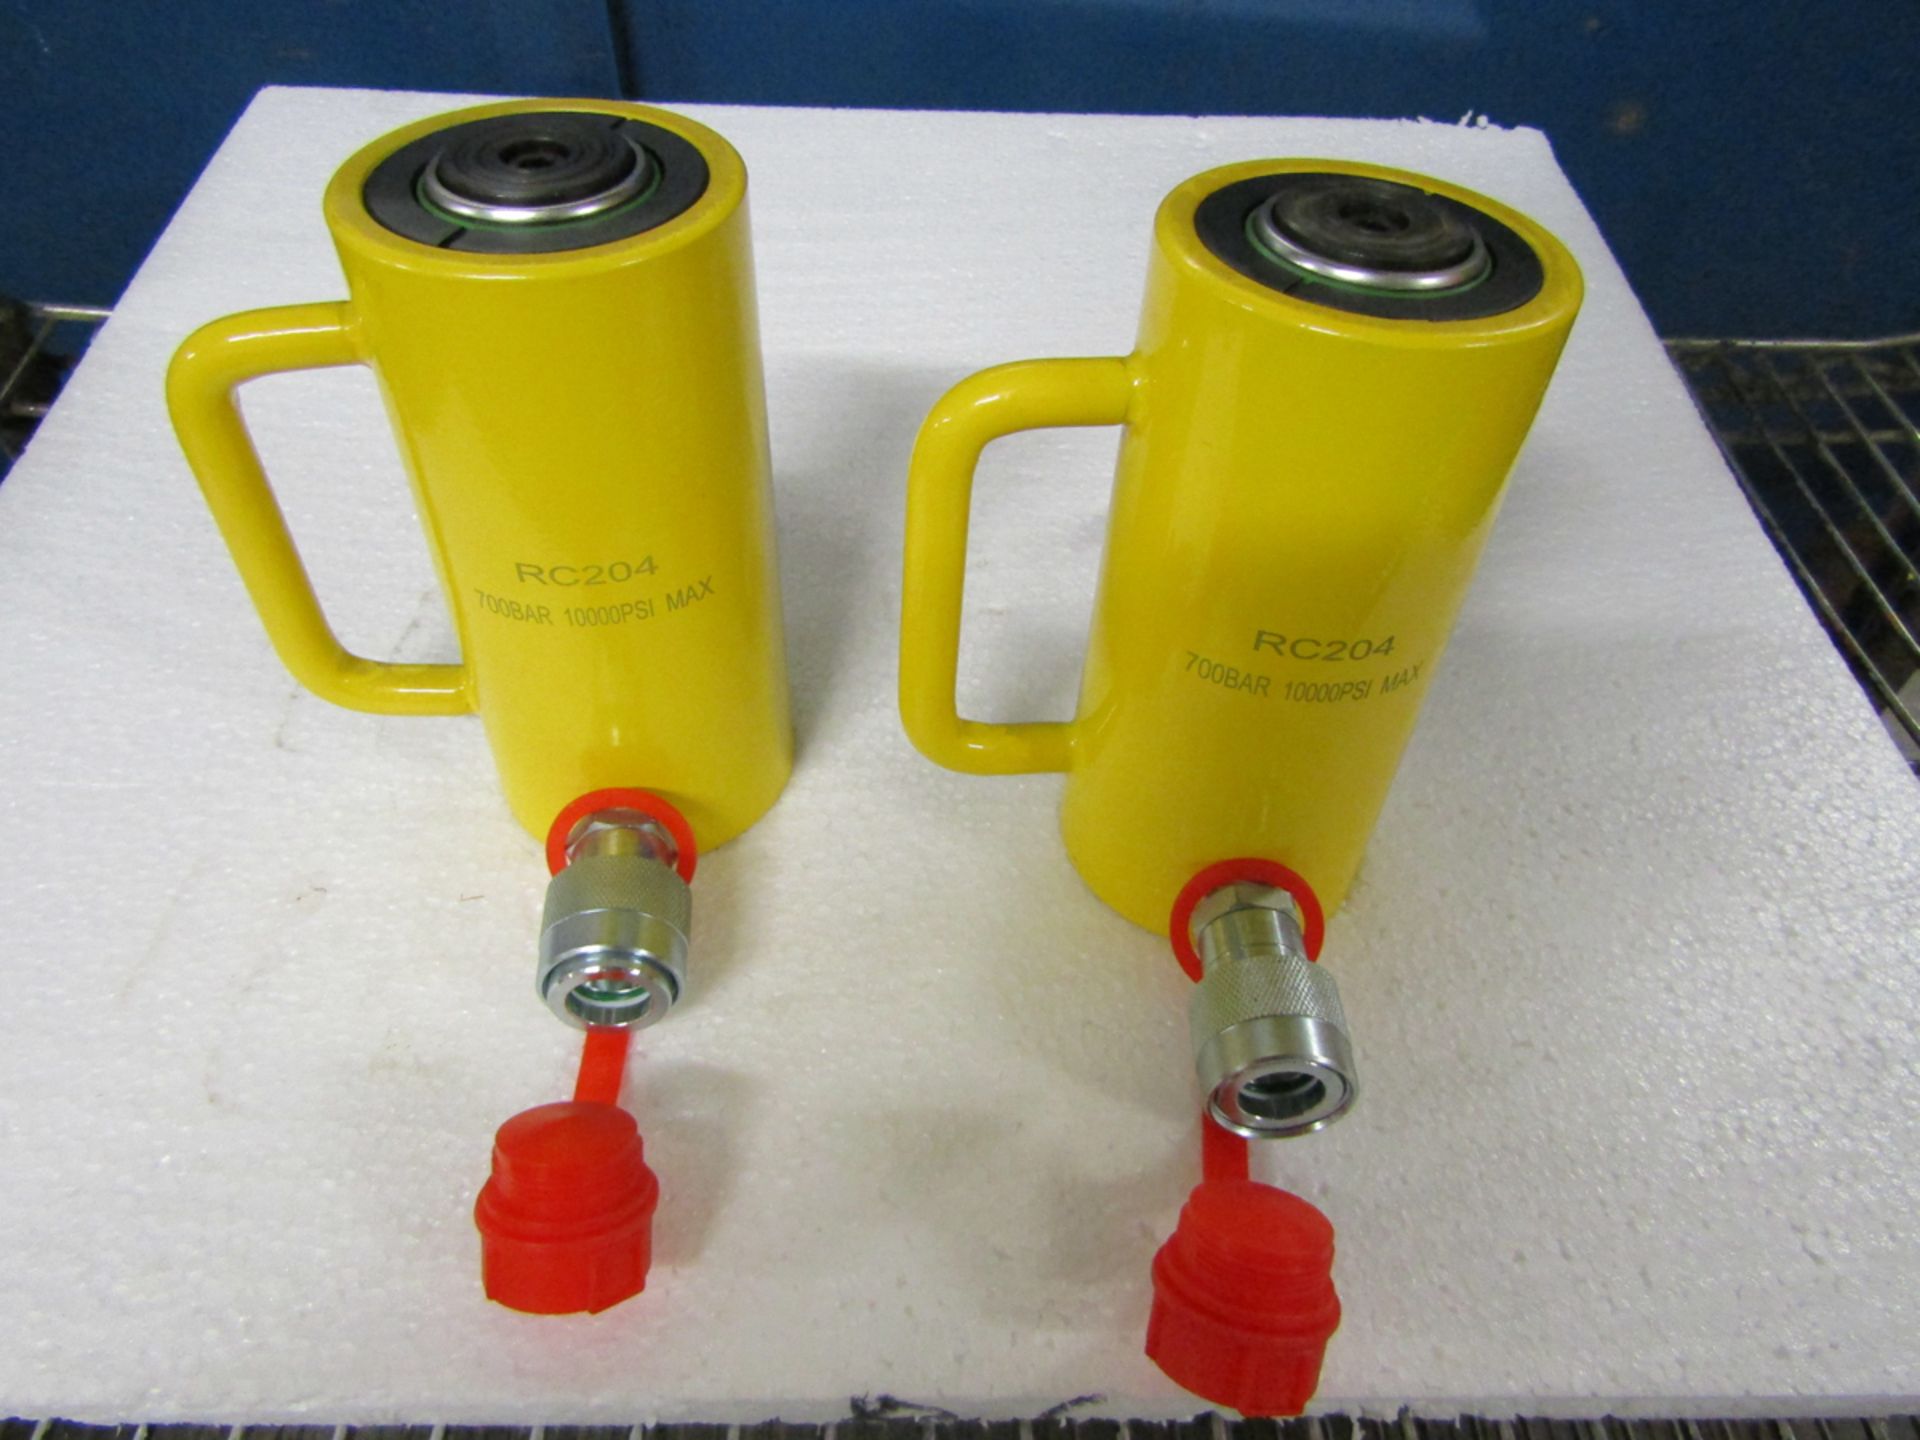 "NEW" LOT OF 2 (2 UNITS) RC-204, 20 TON HYDRAULIC JACK WITH 4" STROKE TYPE CYLINDER (LOCATED IN